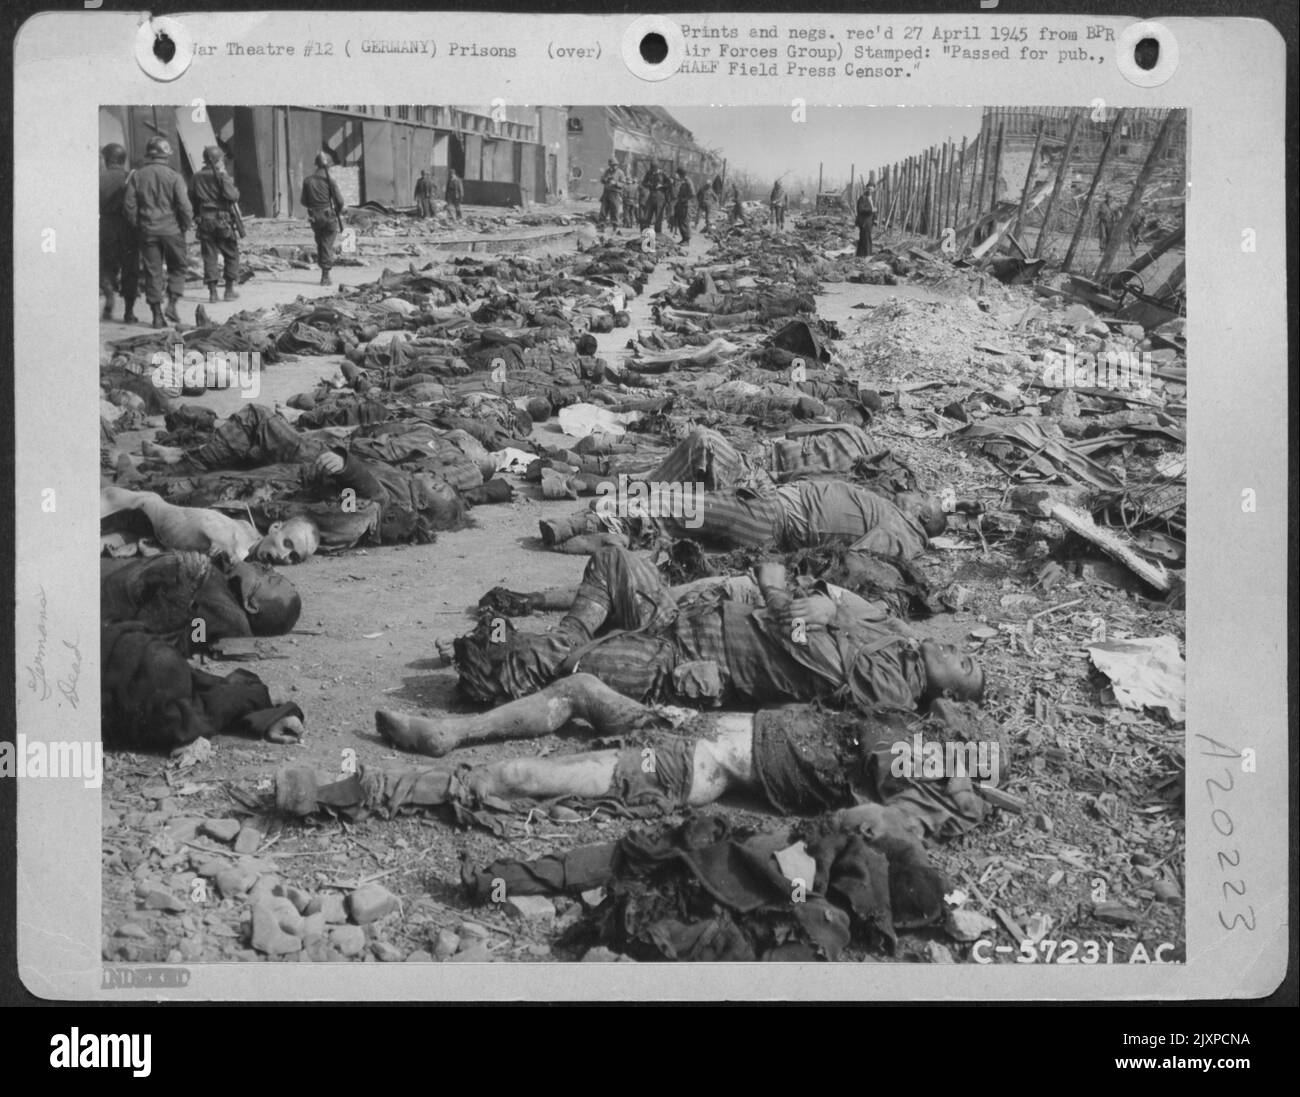 A 9Th A.F. Photographer Accompanying Advance Elements Of Armor And Infantry Made This Picture At The Slave Labor Camp Near Nordhausen, Germany. Hundreds Of Workers Were Systemactically Starved To Death. Stock Photo